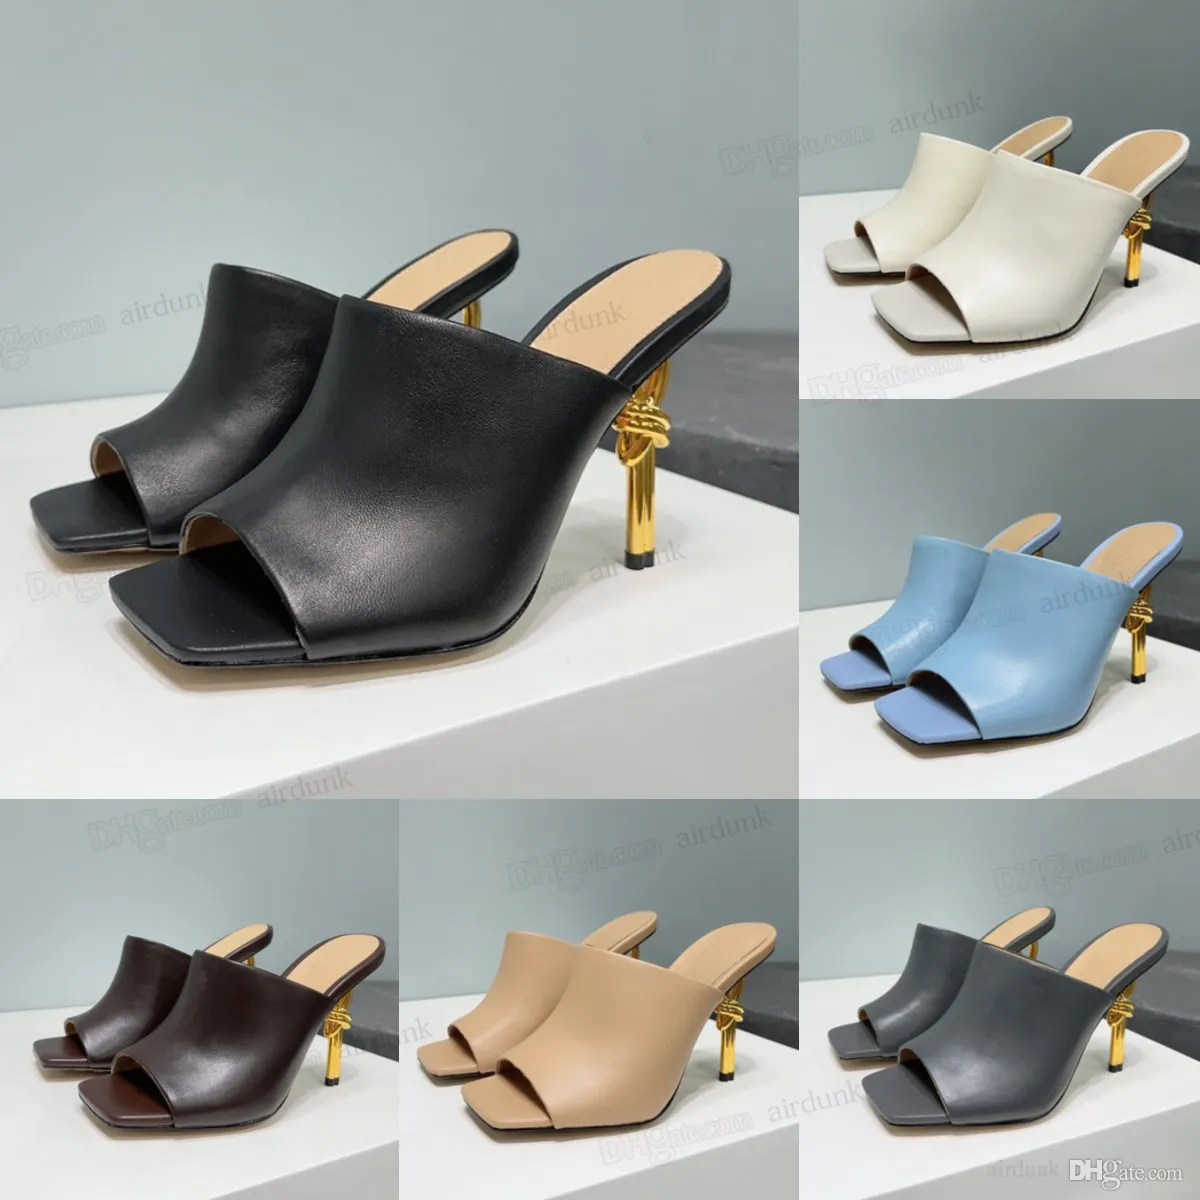 2023 Knot Mule Sandal Summer New Women Metal High-heeled shoes Designers Leather rubber Fashion Sexy High quality Square head sandal Size 35-41